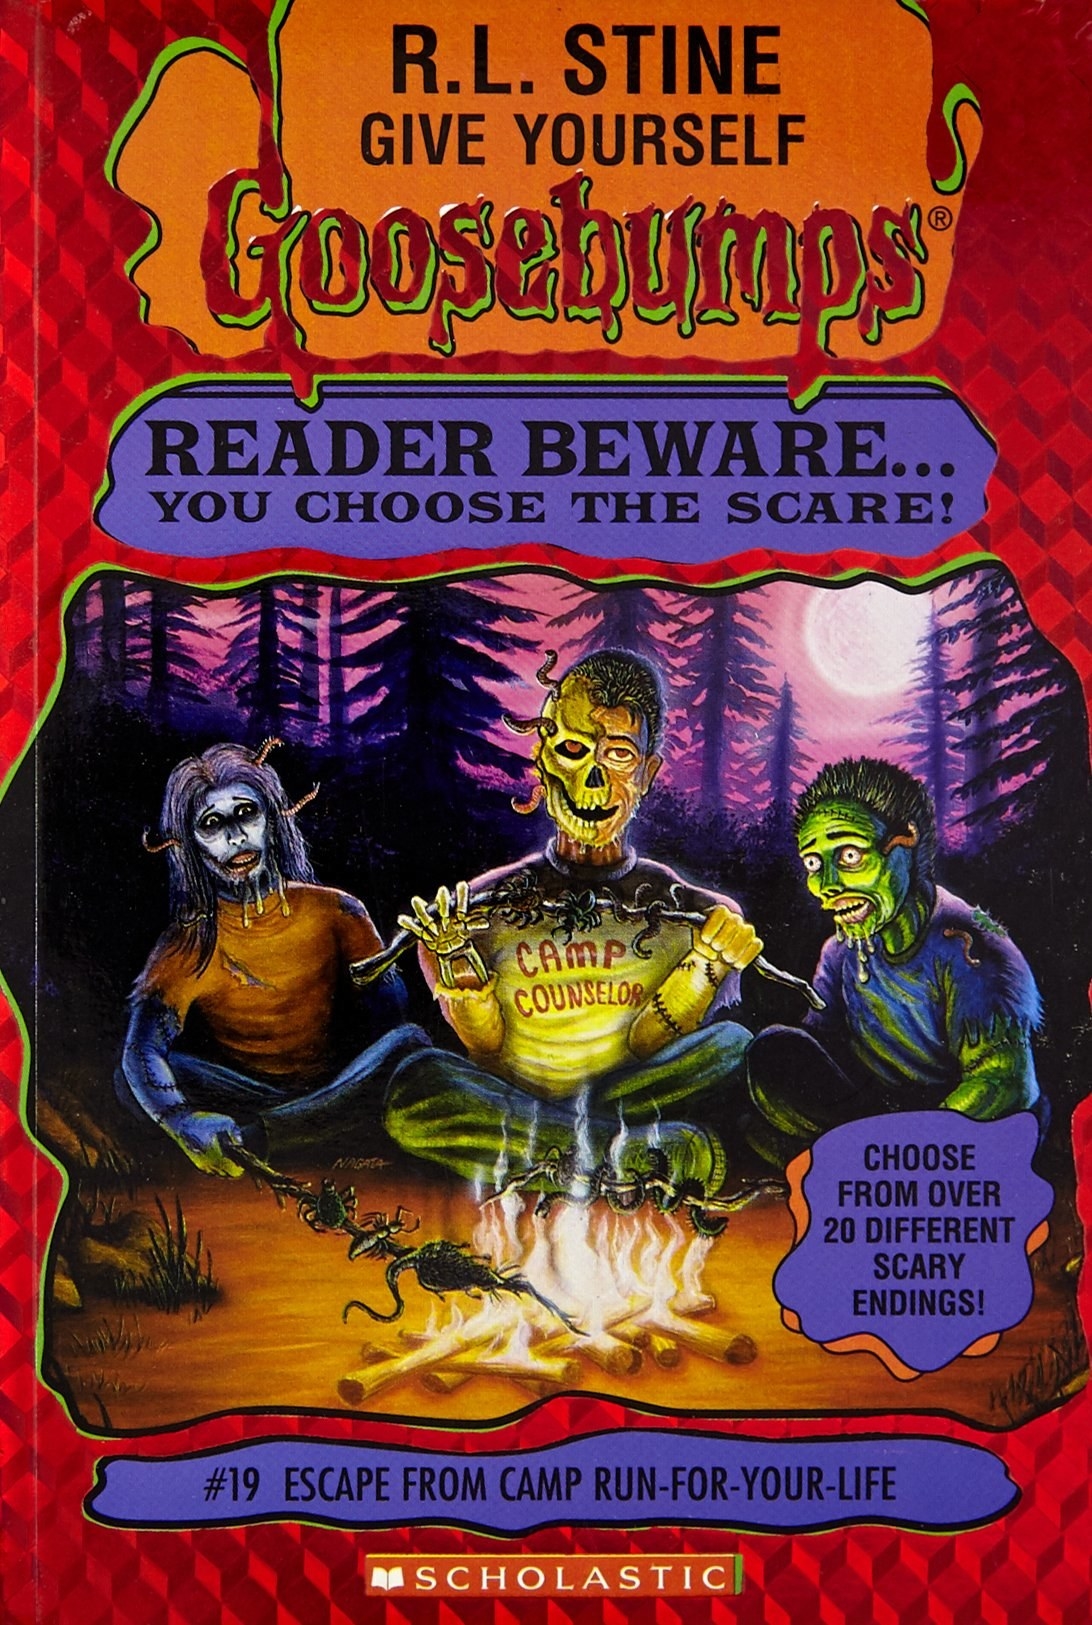 Photo of a book cover showing a half-skeleton man, zombie, and other creature, roasting snakes at a campfire